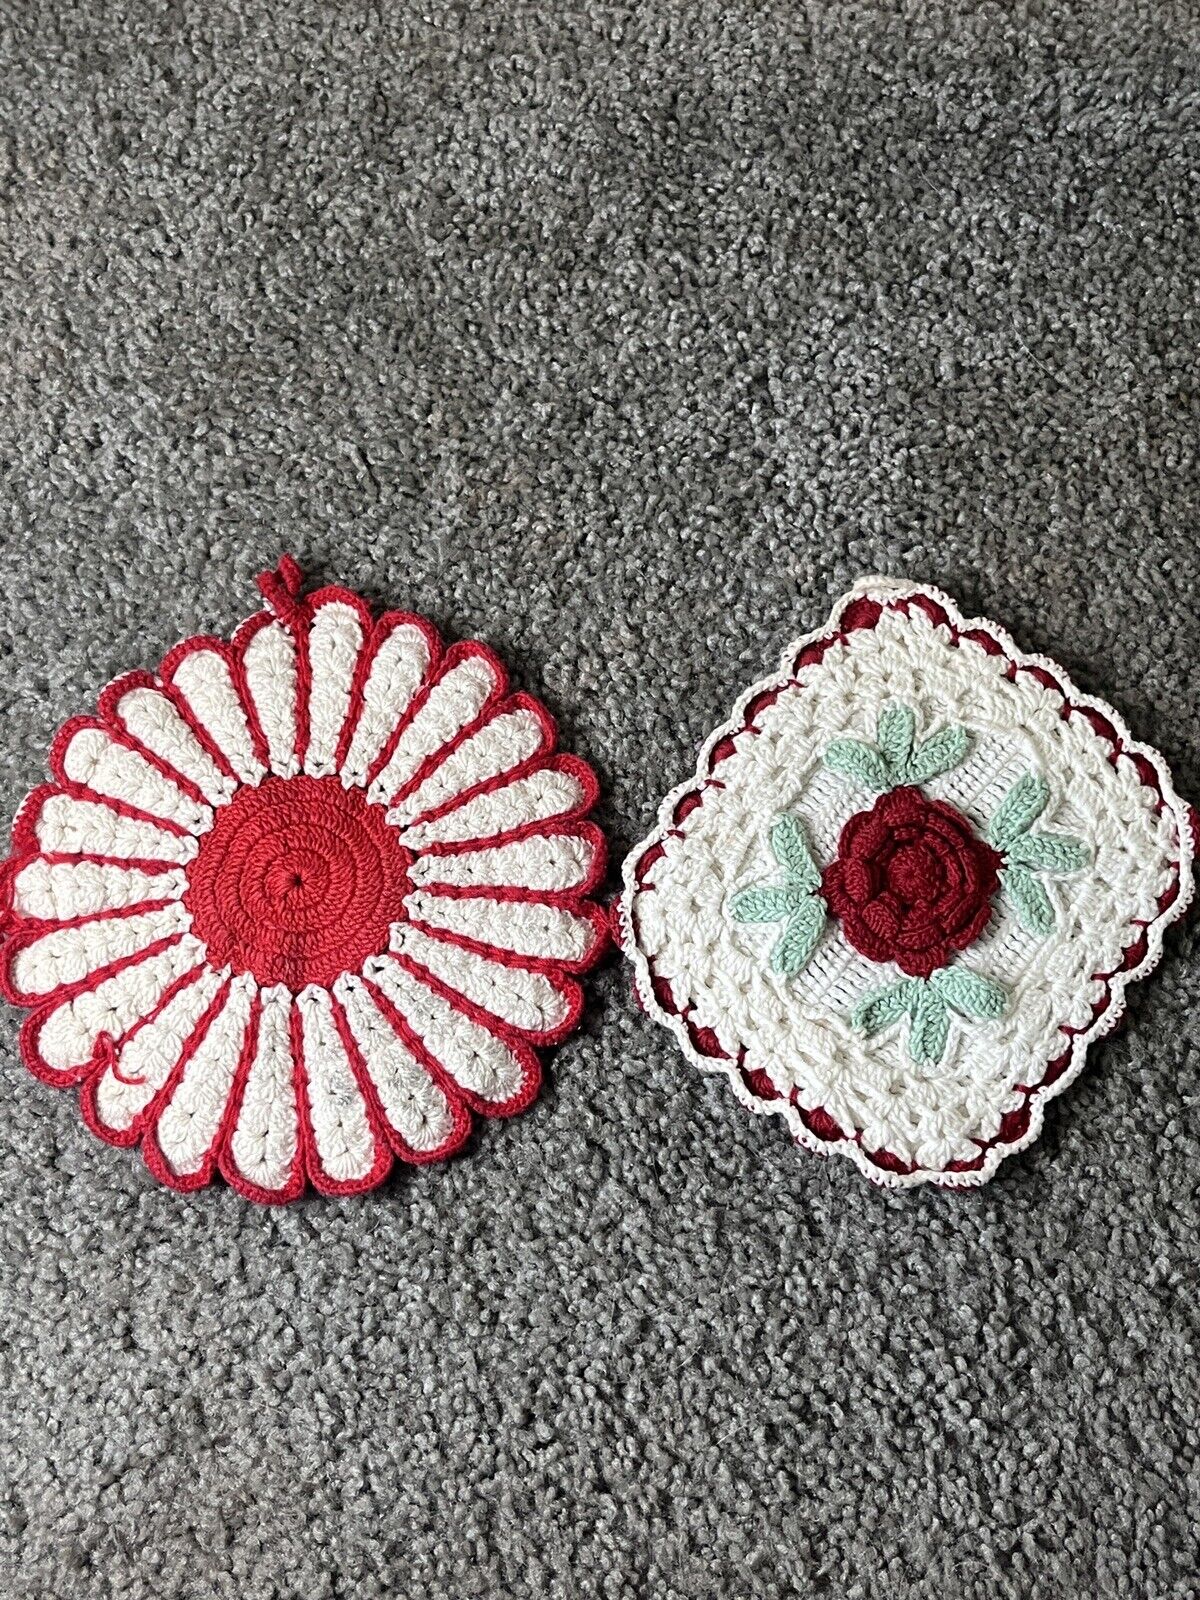 Vintage Hand Crochet Red And White Rose Hot Pad Potholder Granny Chic Set Of 2